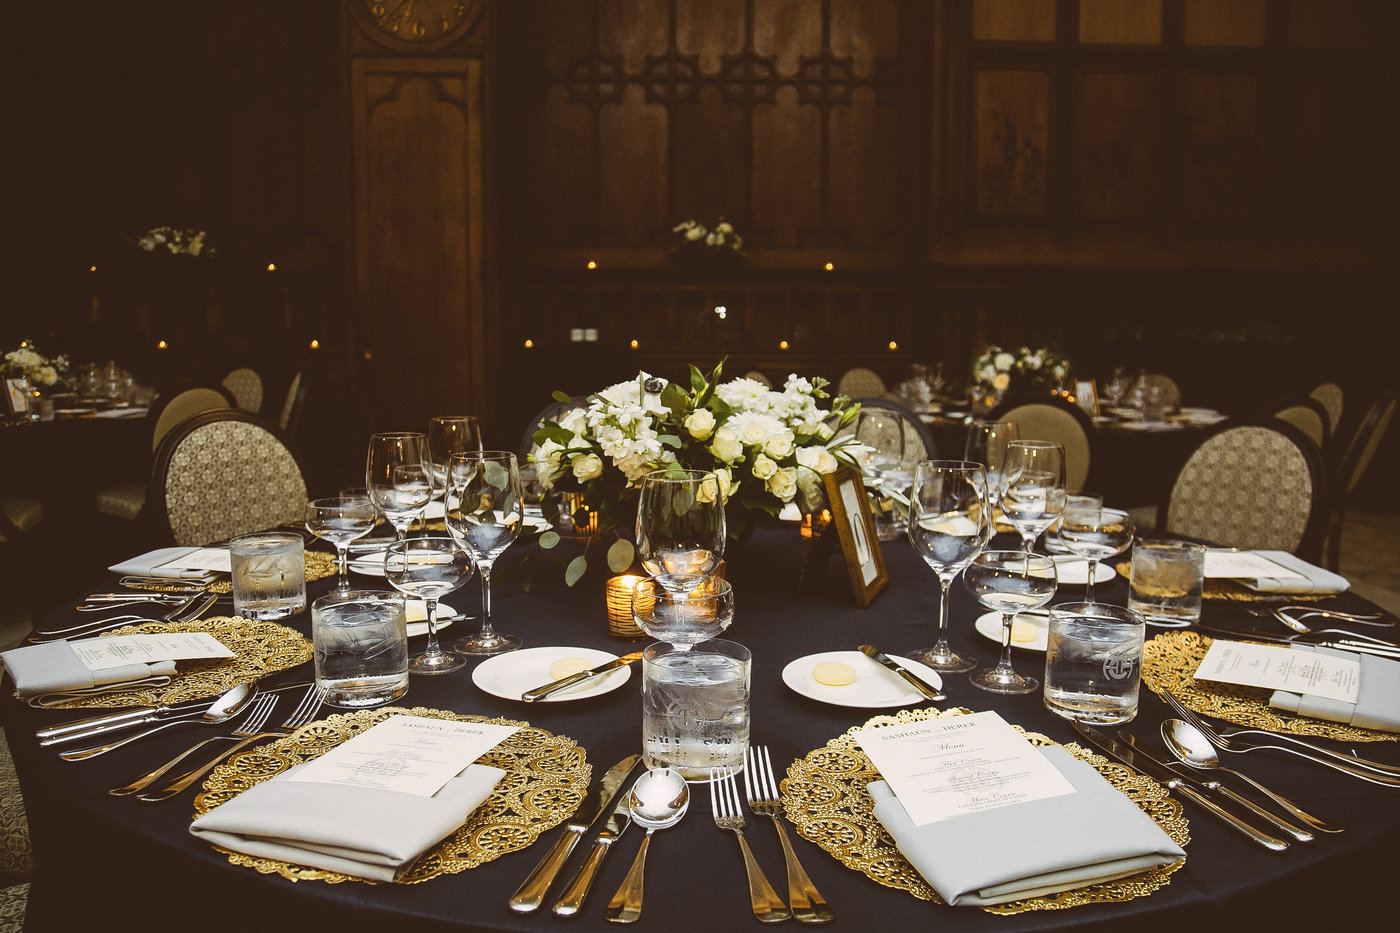 Reception at Chicago Athletic Association with monochromatic arrangements, navy and gold detail for an October wedding.